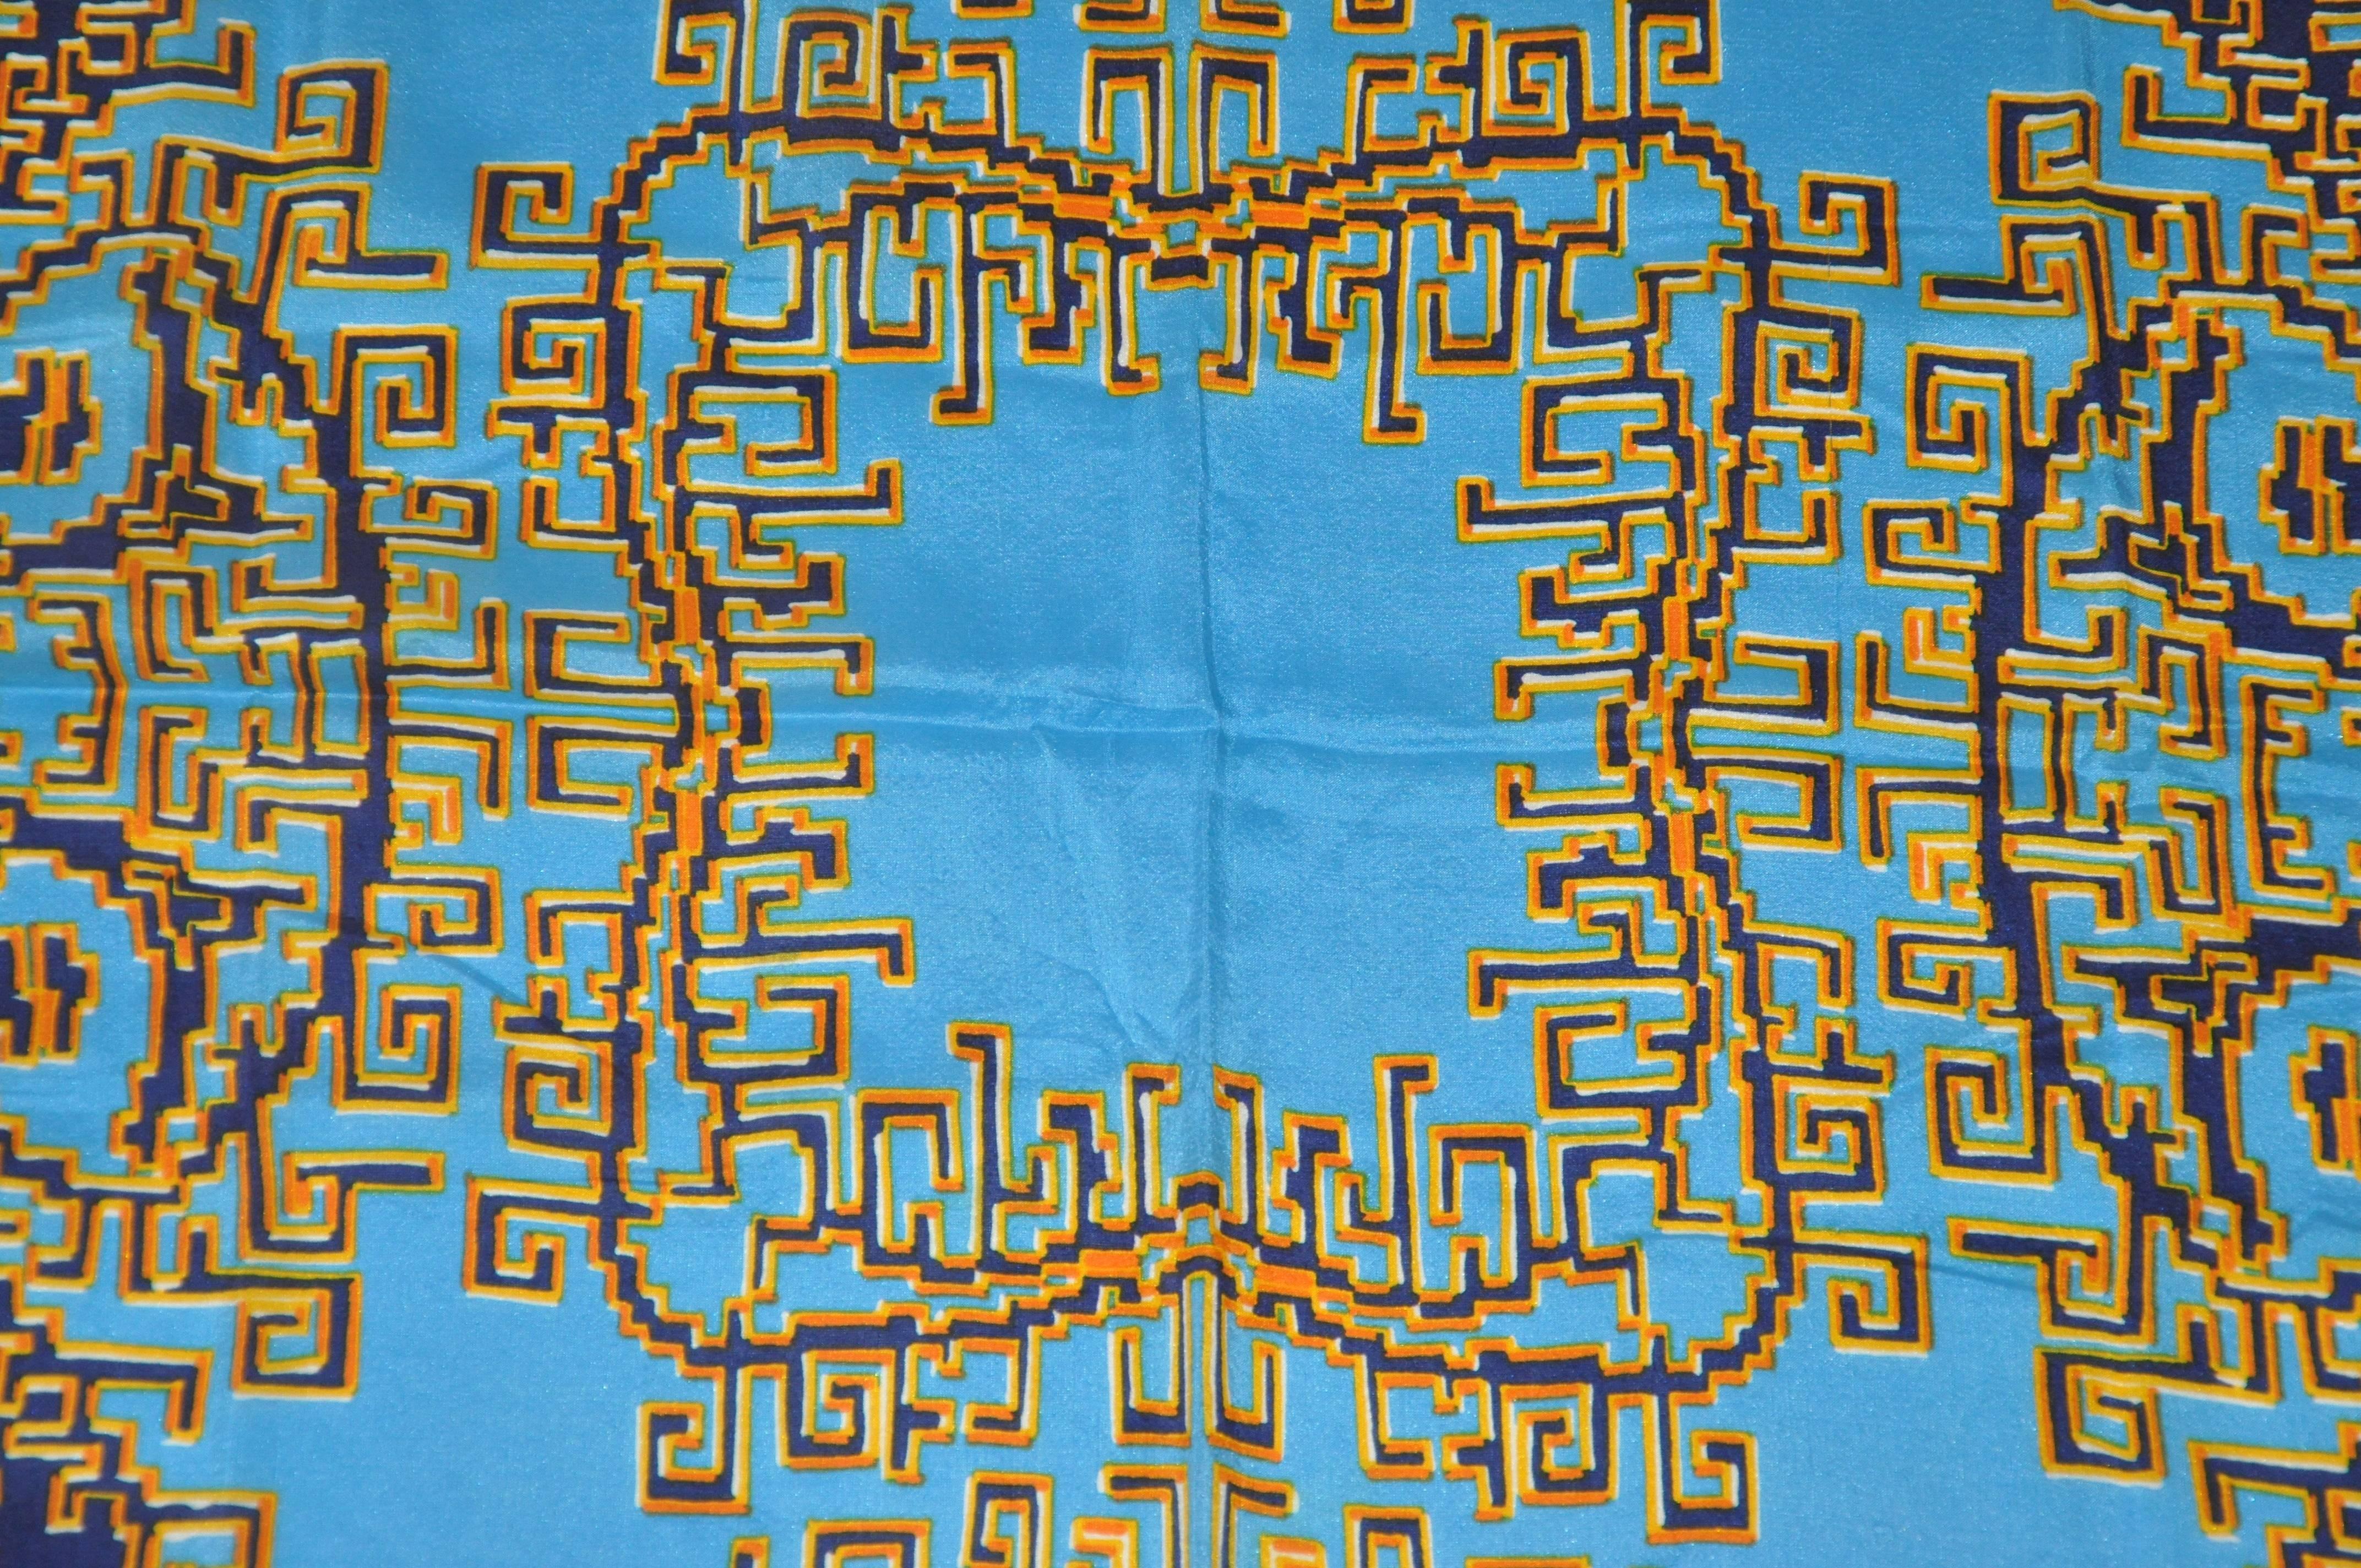        Patricia Duval wonderful silk crepe di chine scarfs of multi shades of blues, tangerine & yellow is detailed with hand-rolled white edges. Scarf measures 30 inches by 28 inches, and made in France.